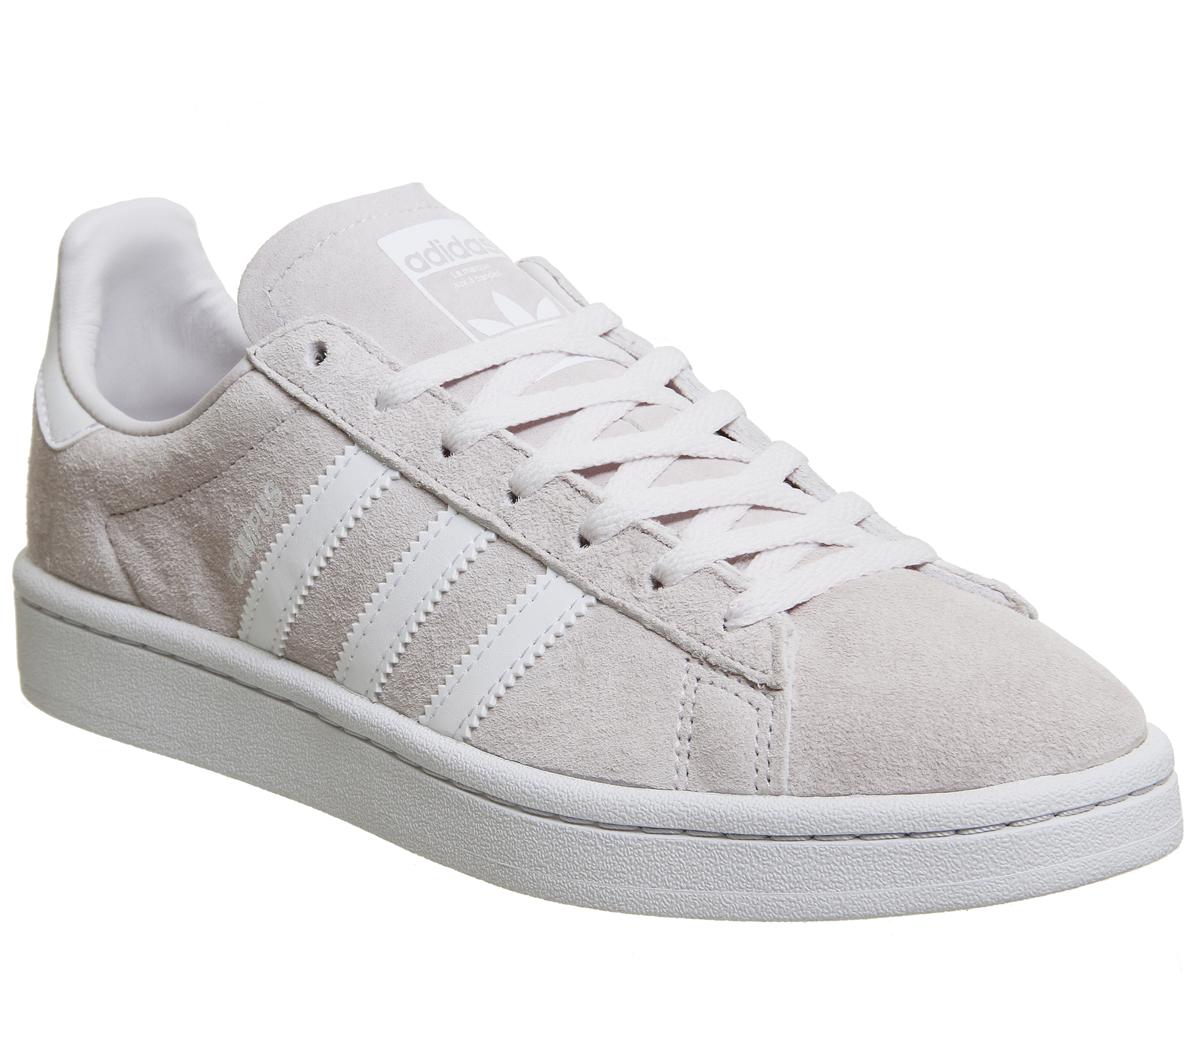 adidas Campus Trainers Orchid Tint 